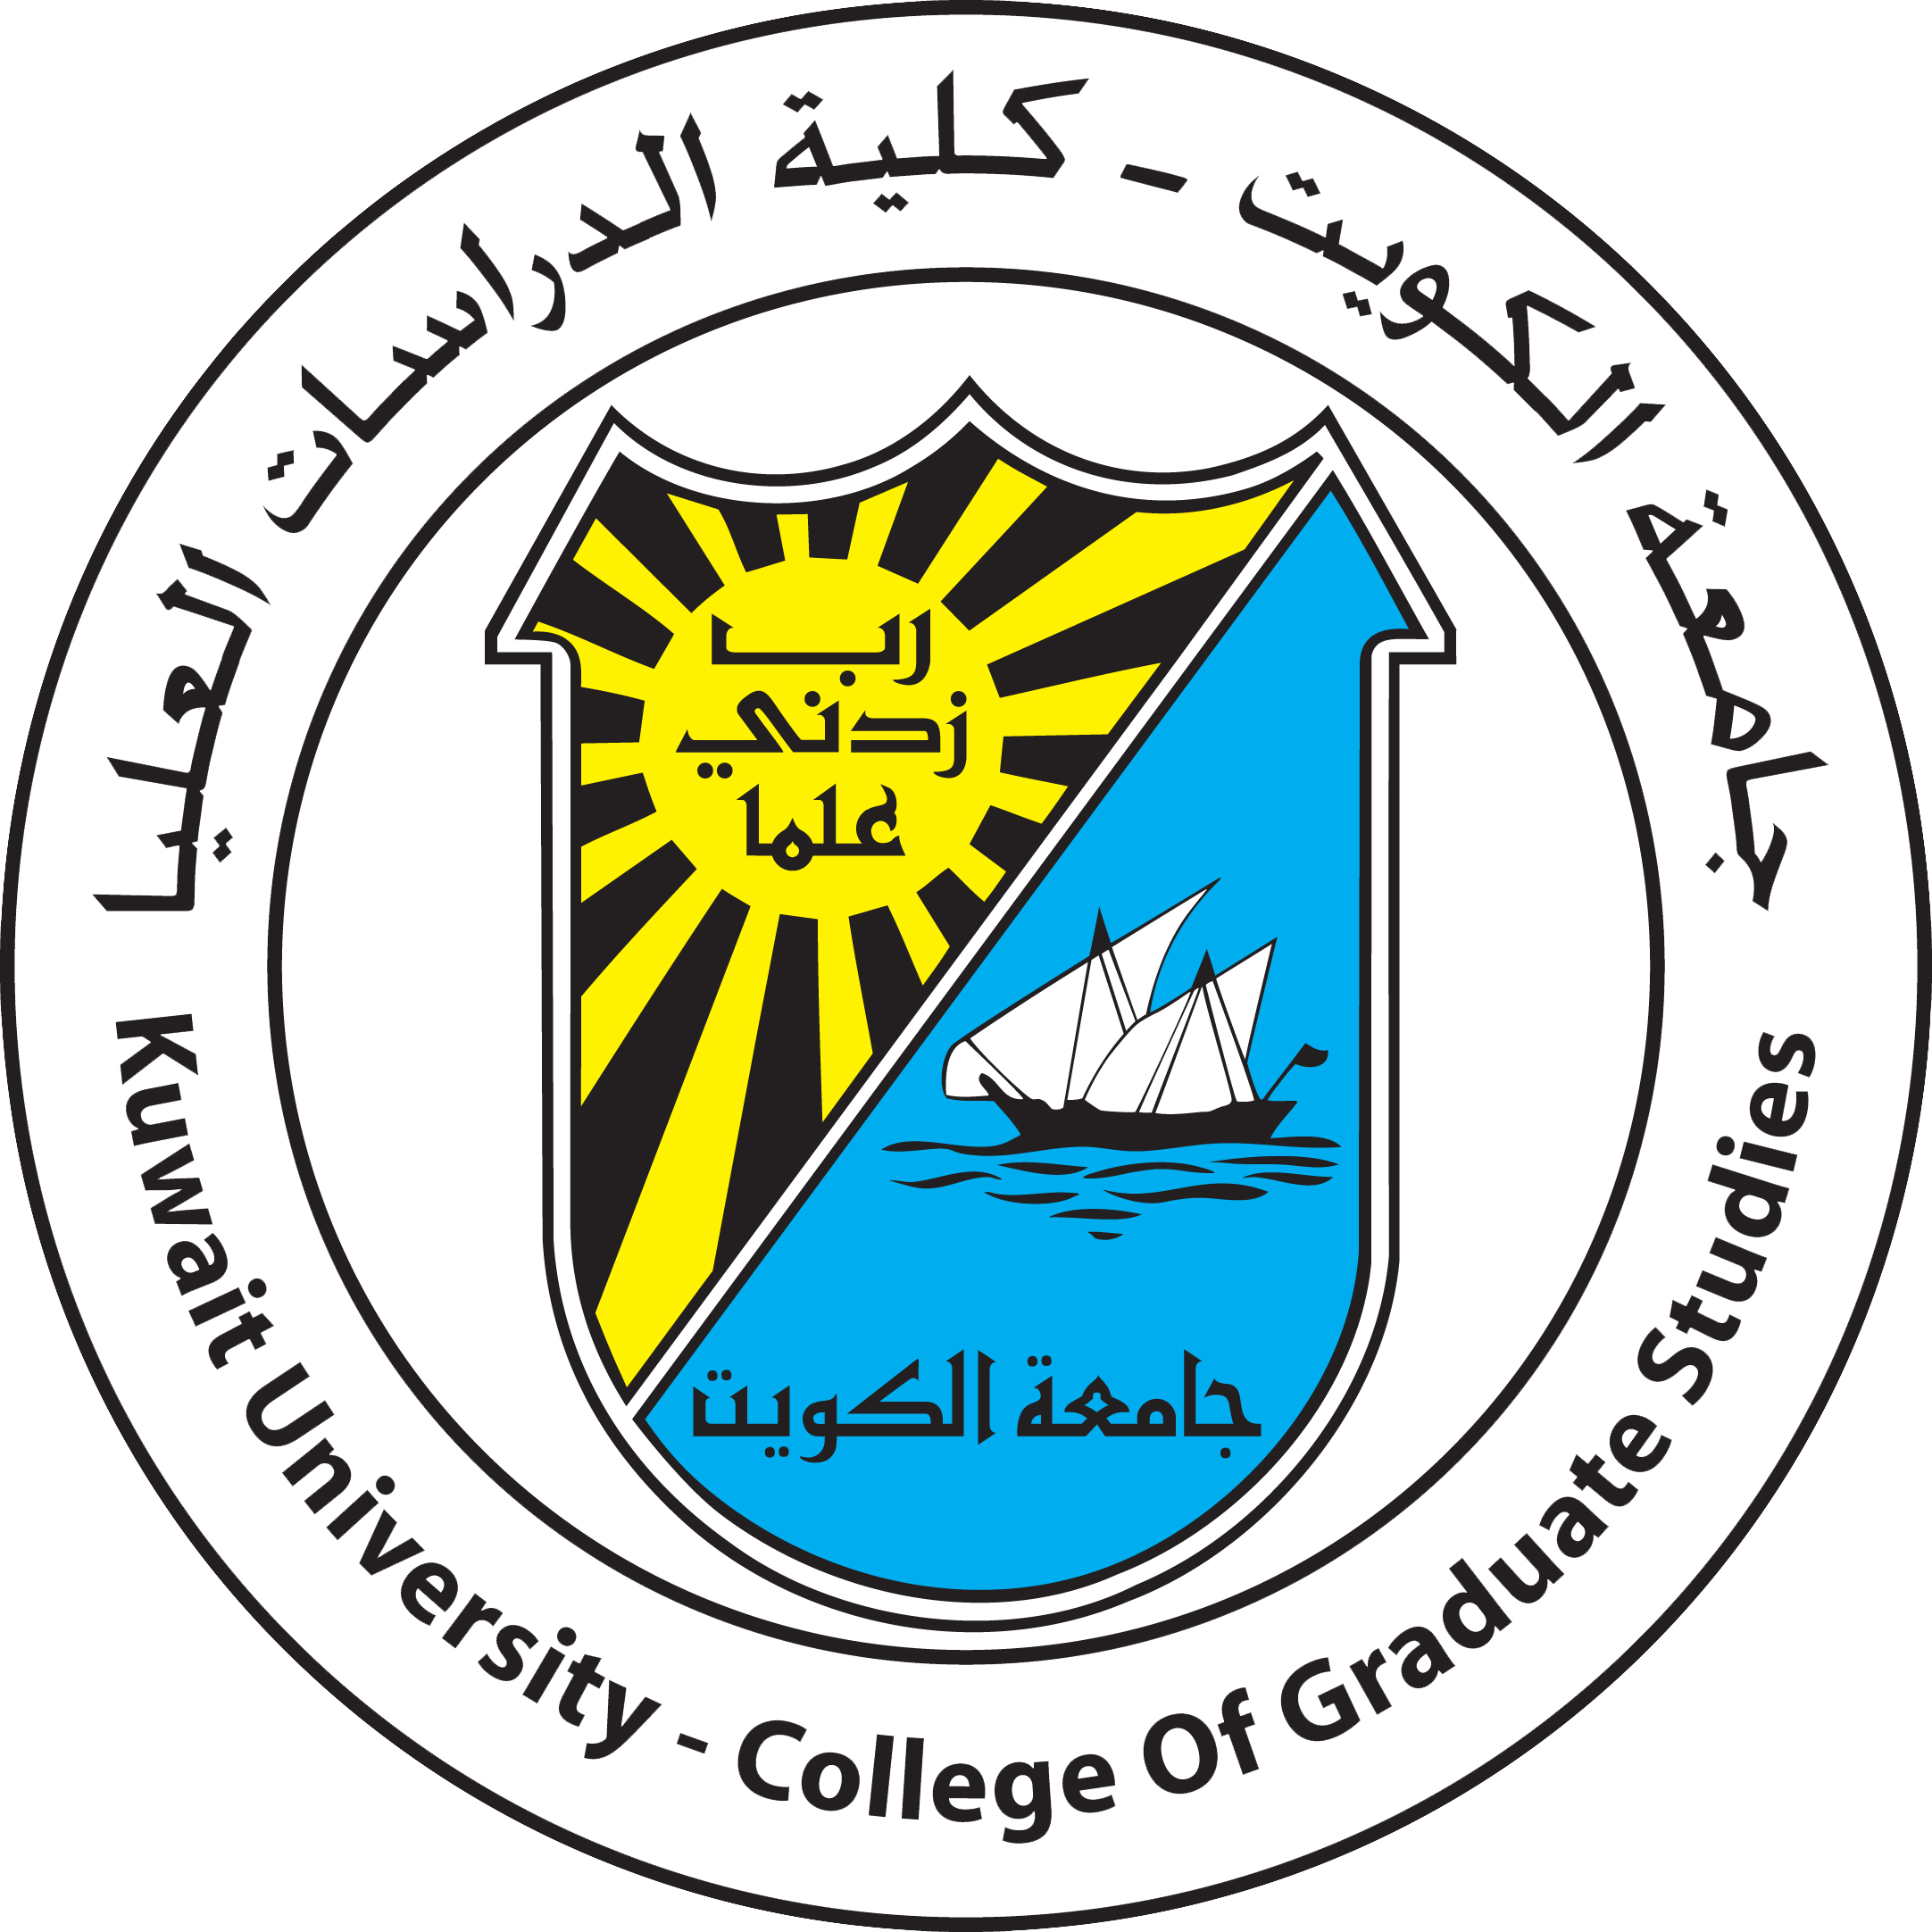 The Review System, College of Graduate Studies, Kuwait University